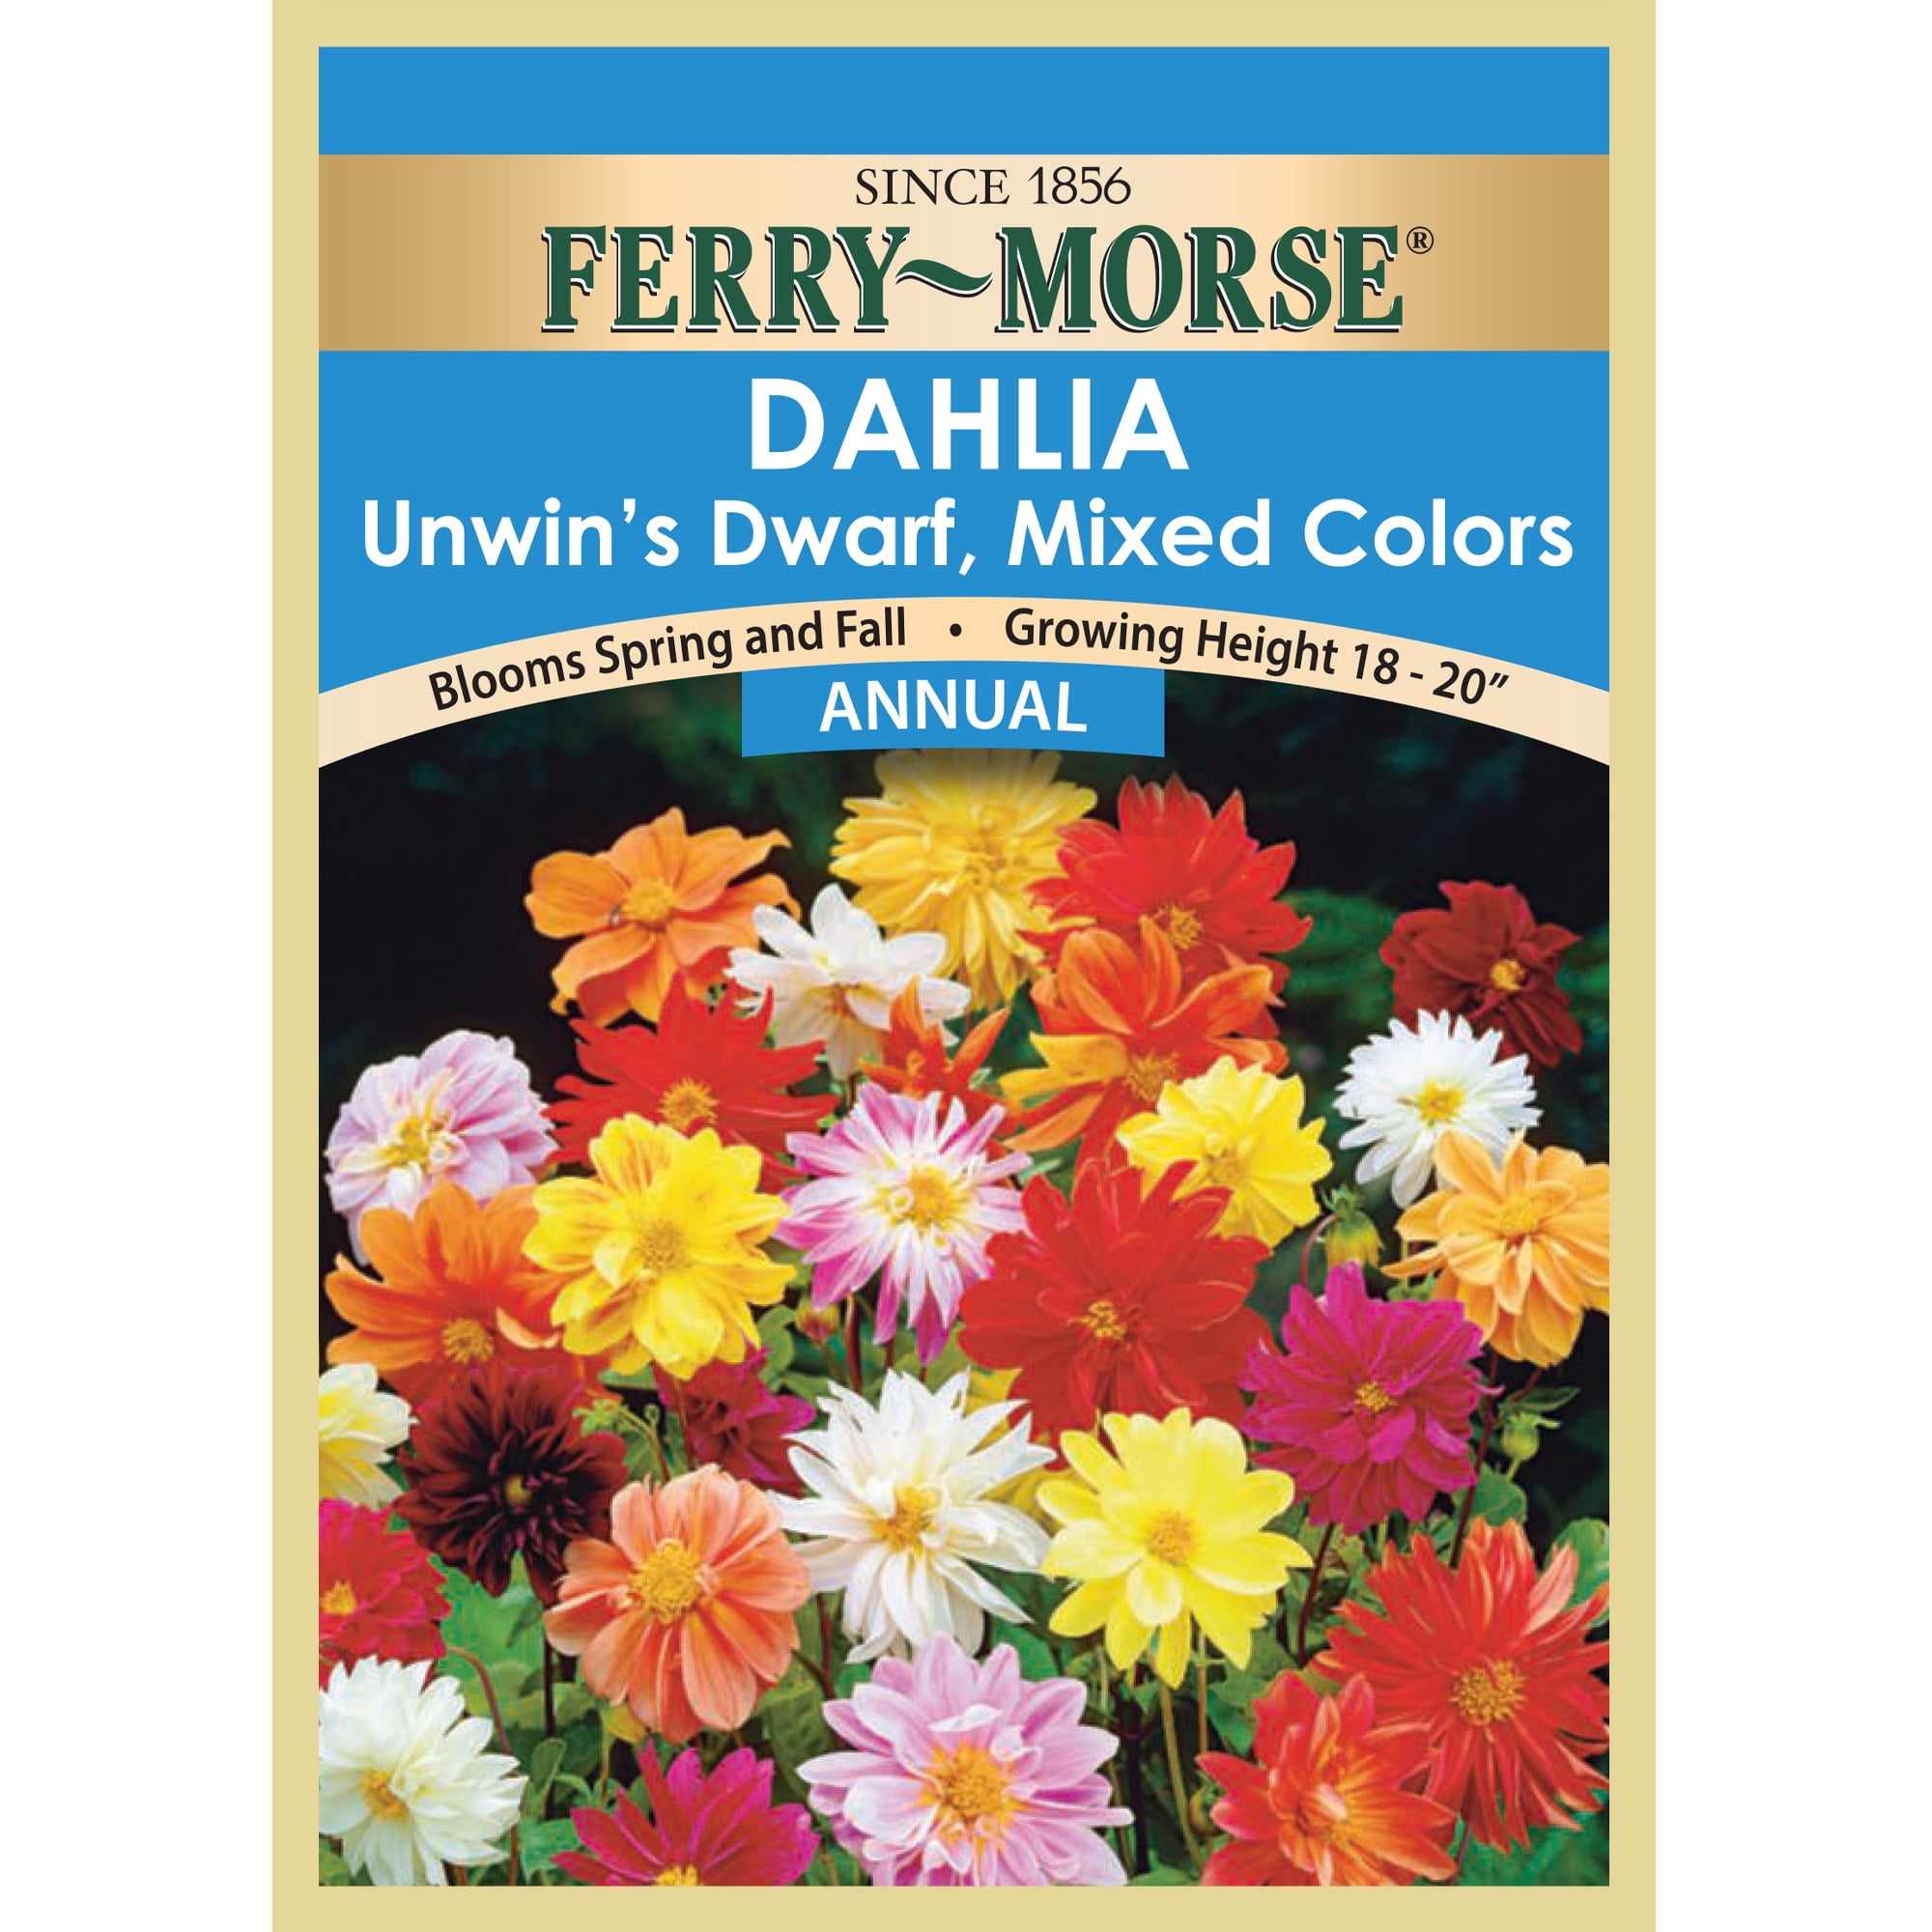 Ferry-Morse Dahlia Unwin's Dwarf Mixed Colors Plant Seeds (1 Pack) - Seed Gardening, Sun/Partial Shade